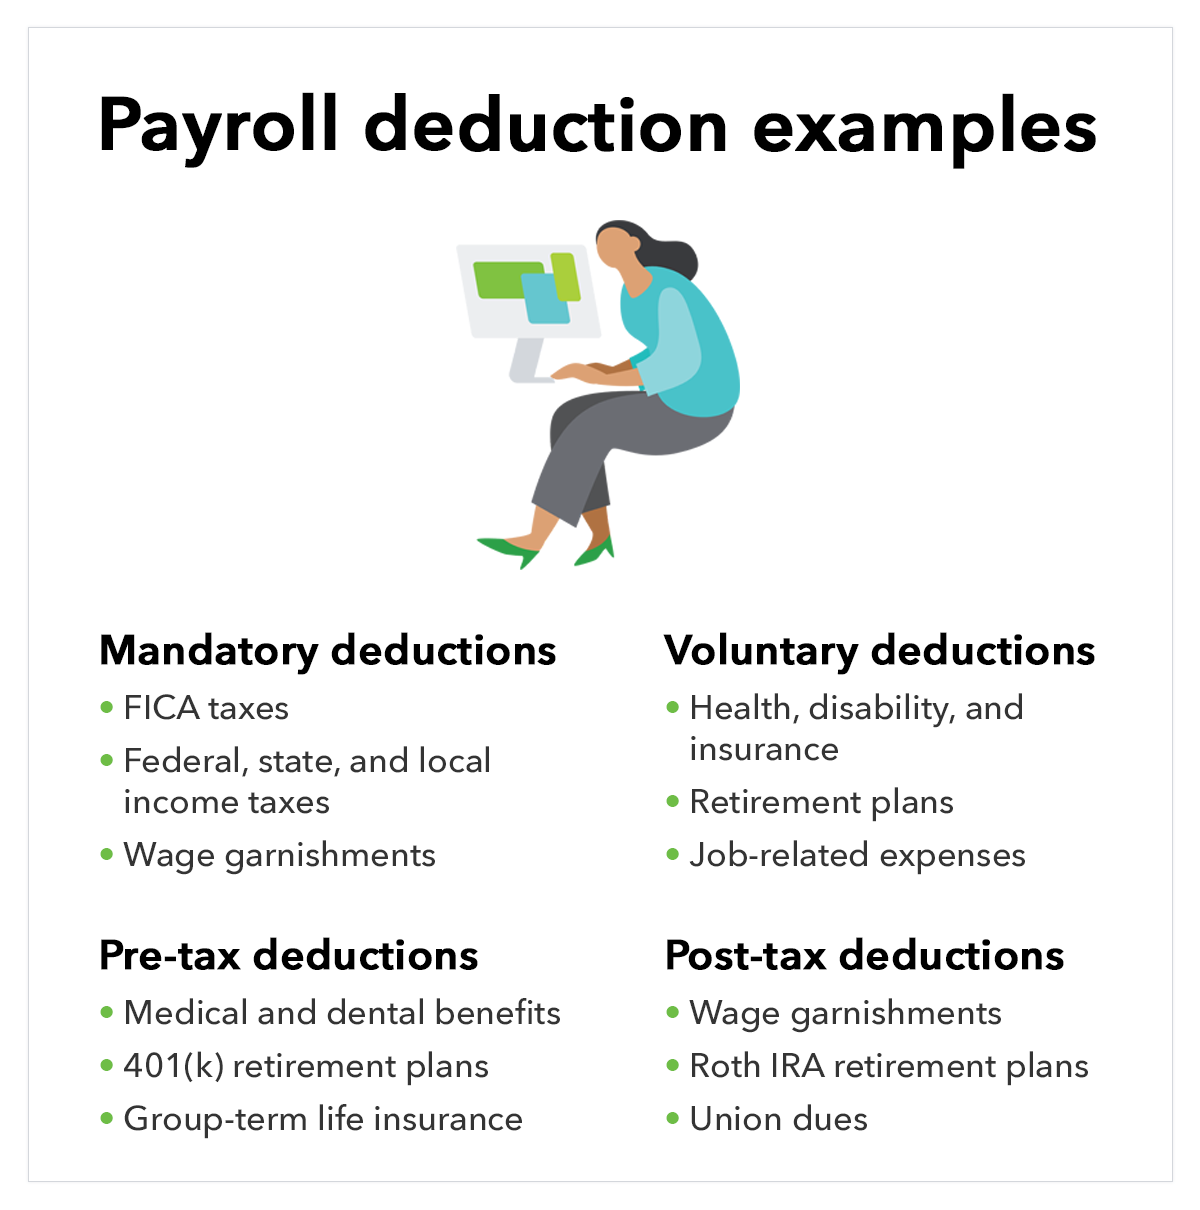 Payroll deductions examples